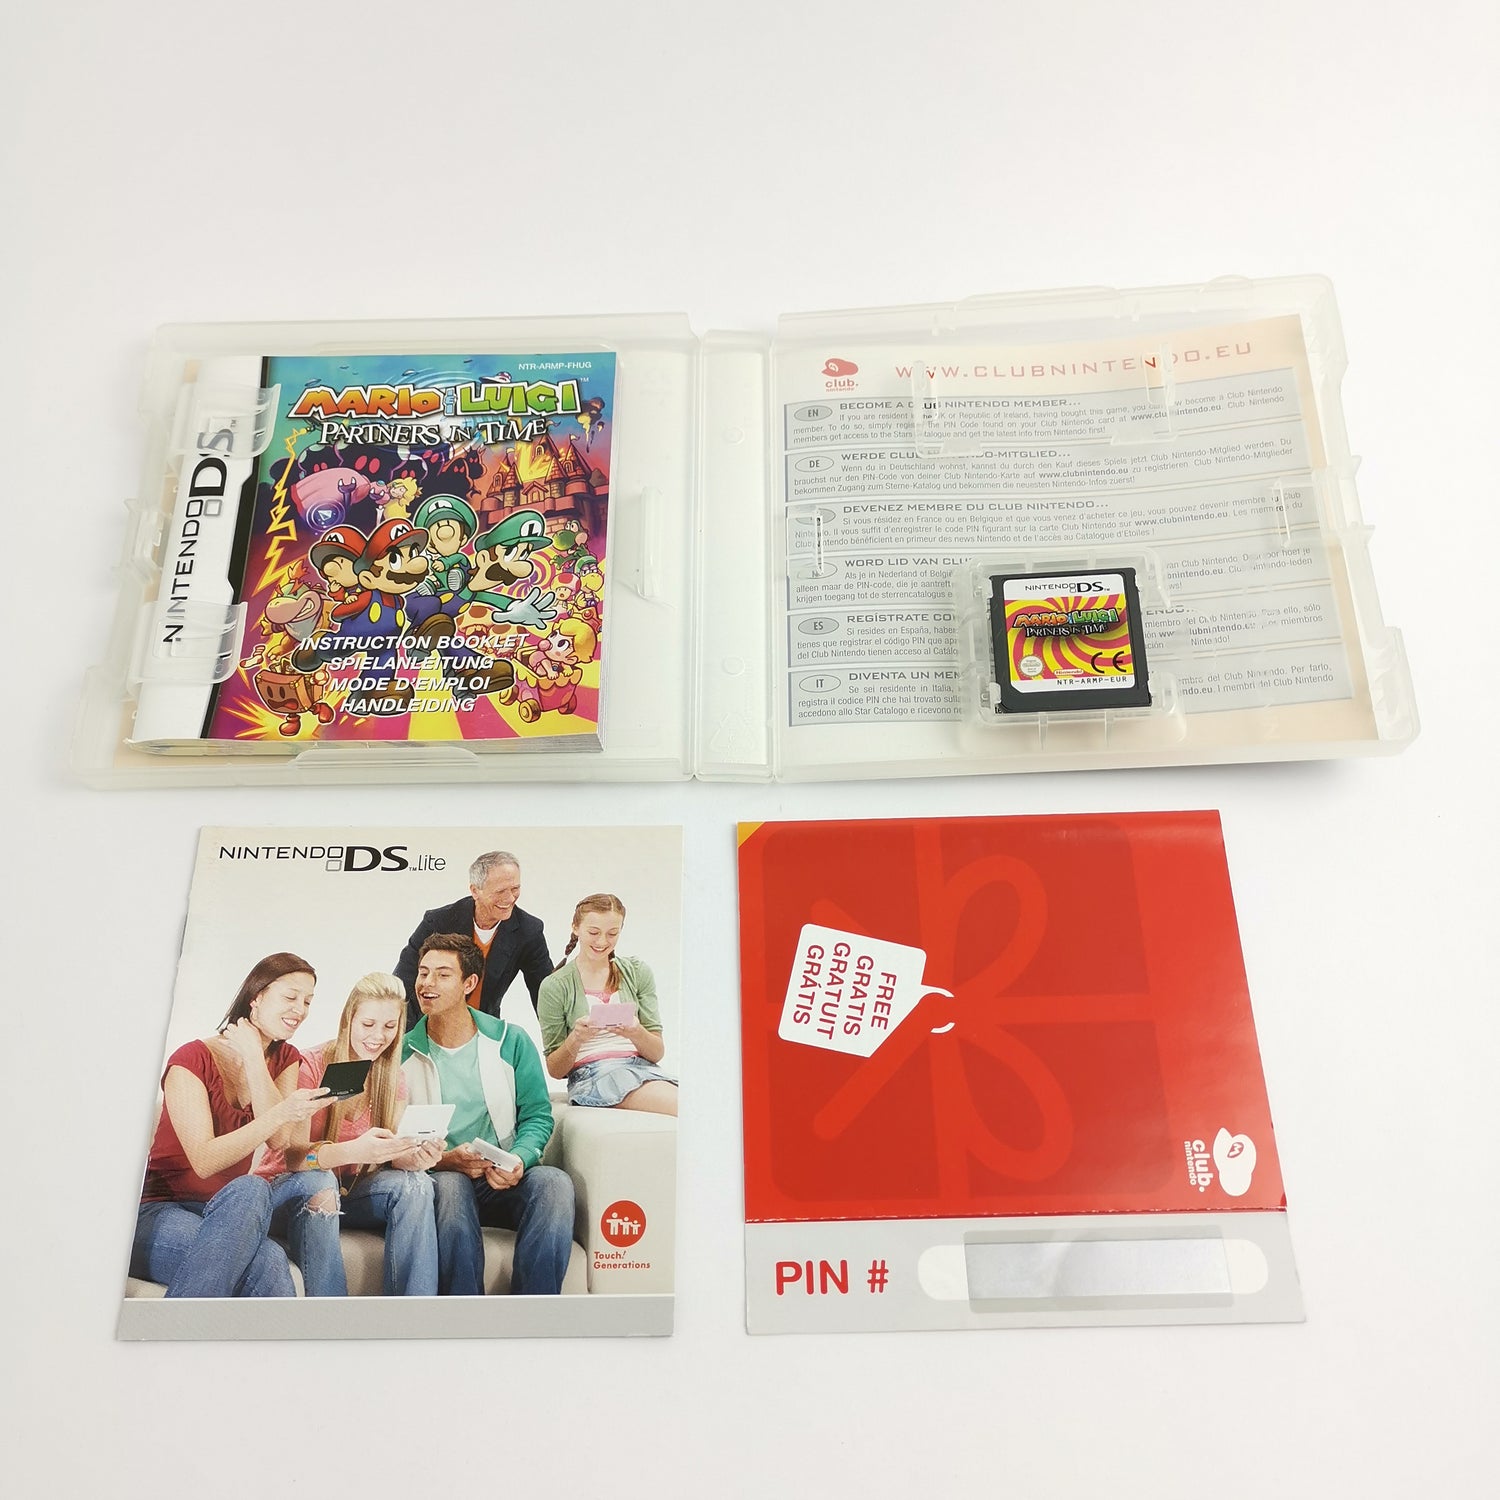 Nintendo DS Game: Mario & Luigi Partners in Time + Official Guide (USA) | Original packaging